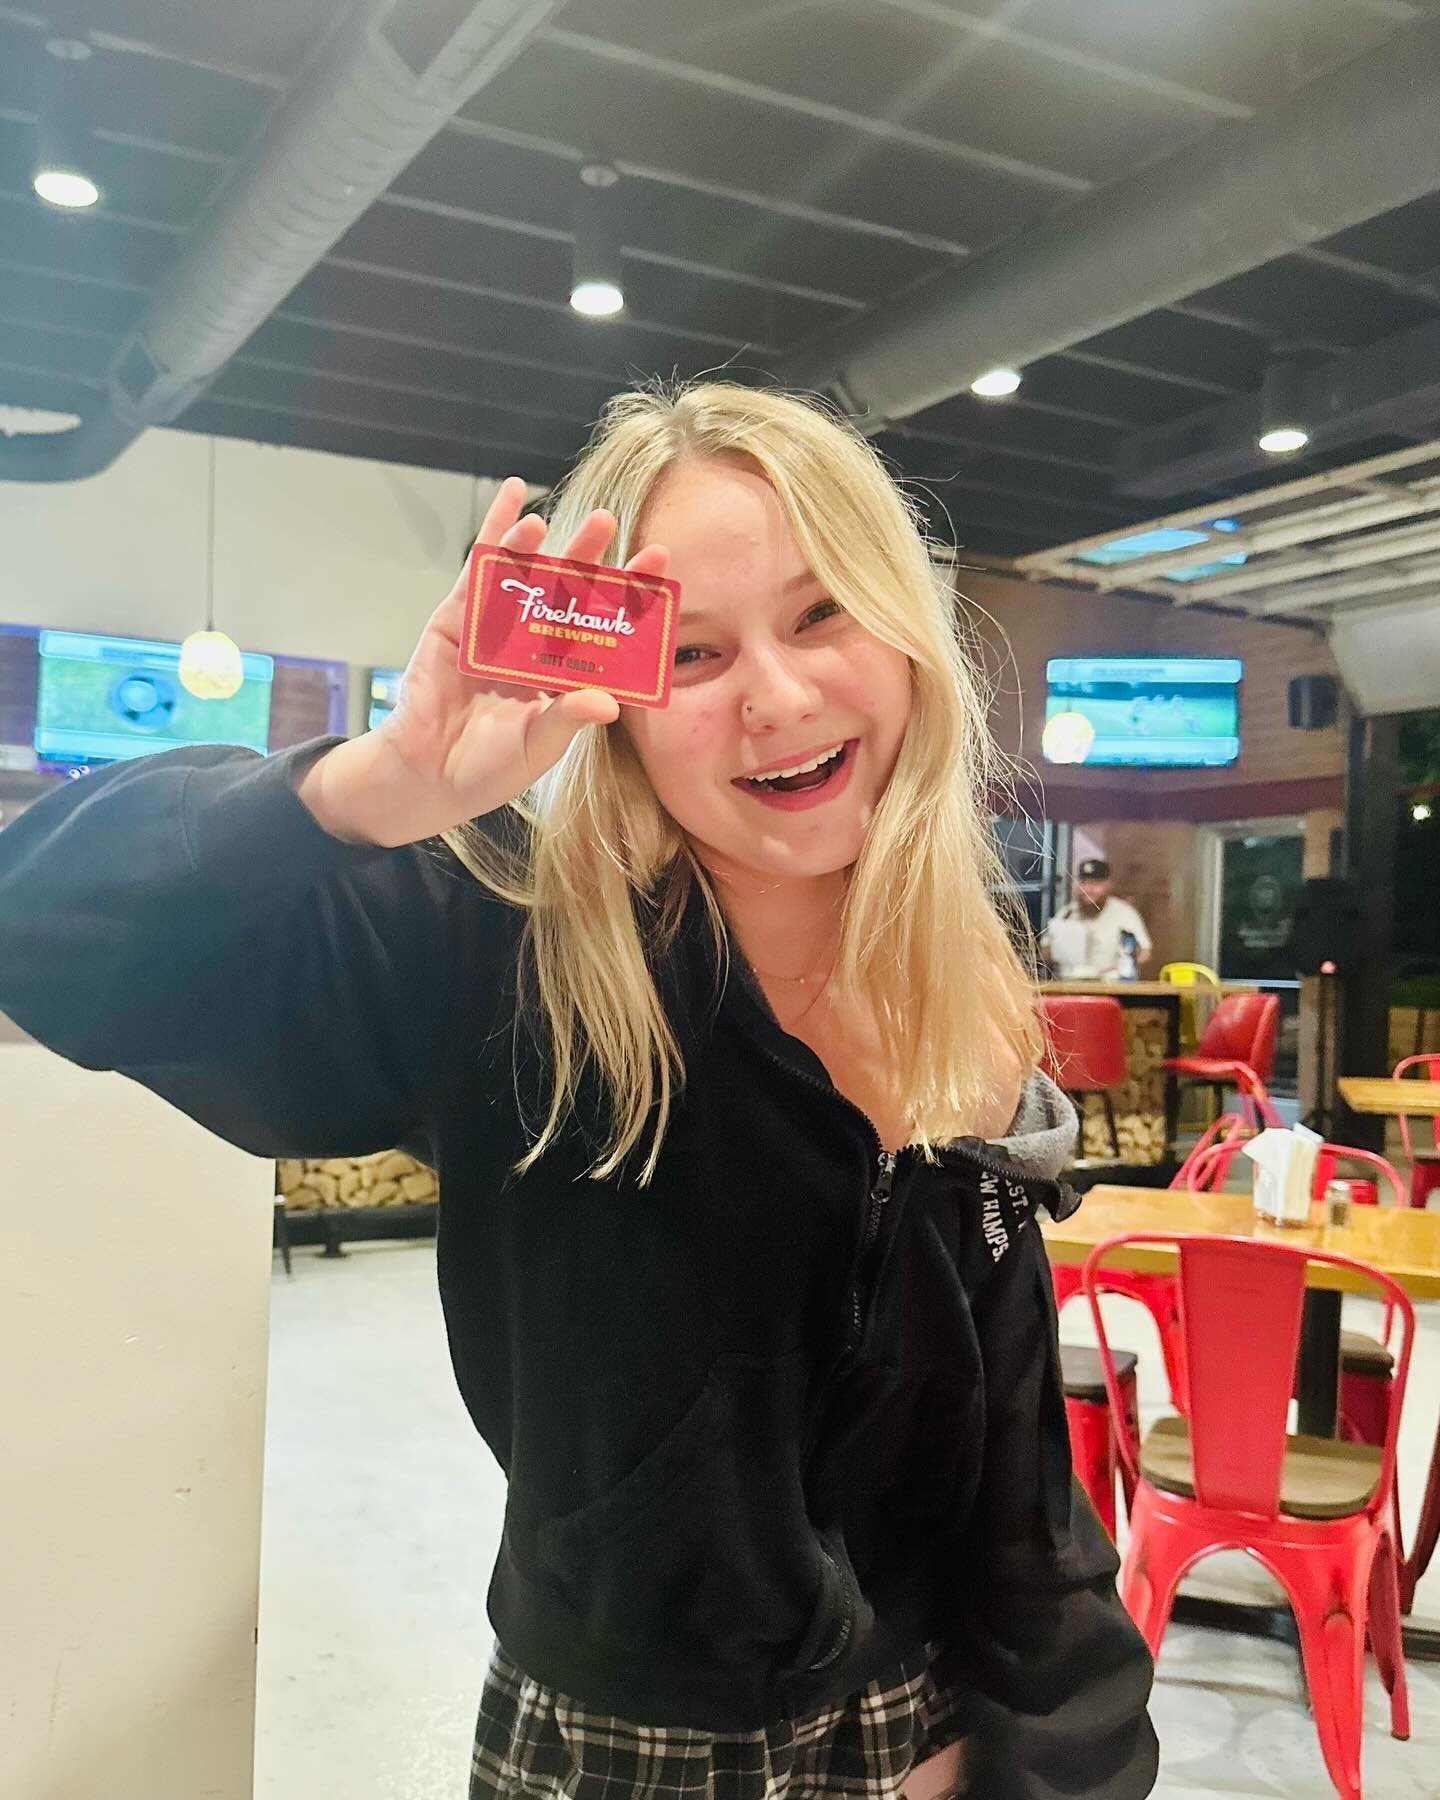 Did you know April 25th at Firehawk is the perfect date? It&rsquo;s not too hot, not too cold. All you need is a light jacket. Plus, there&rsquo;s trivia! Here&rsquo;s a winner from last week who immediately spent her winnings on soft serve &amp; pot